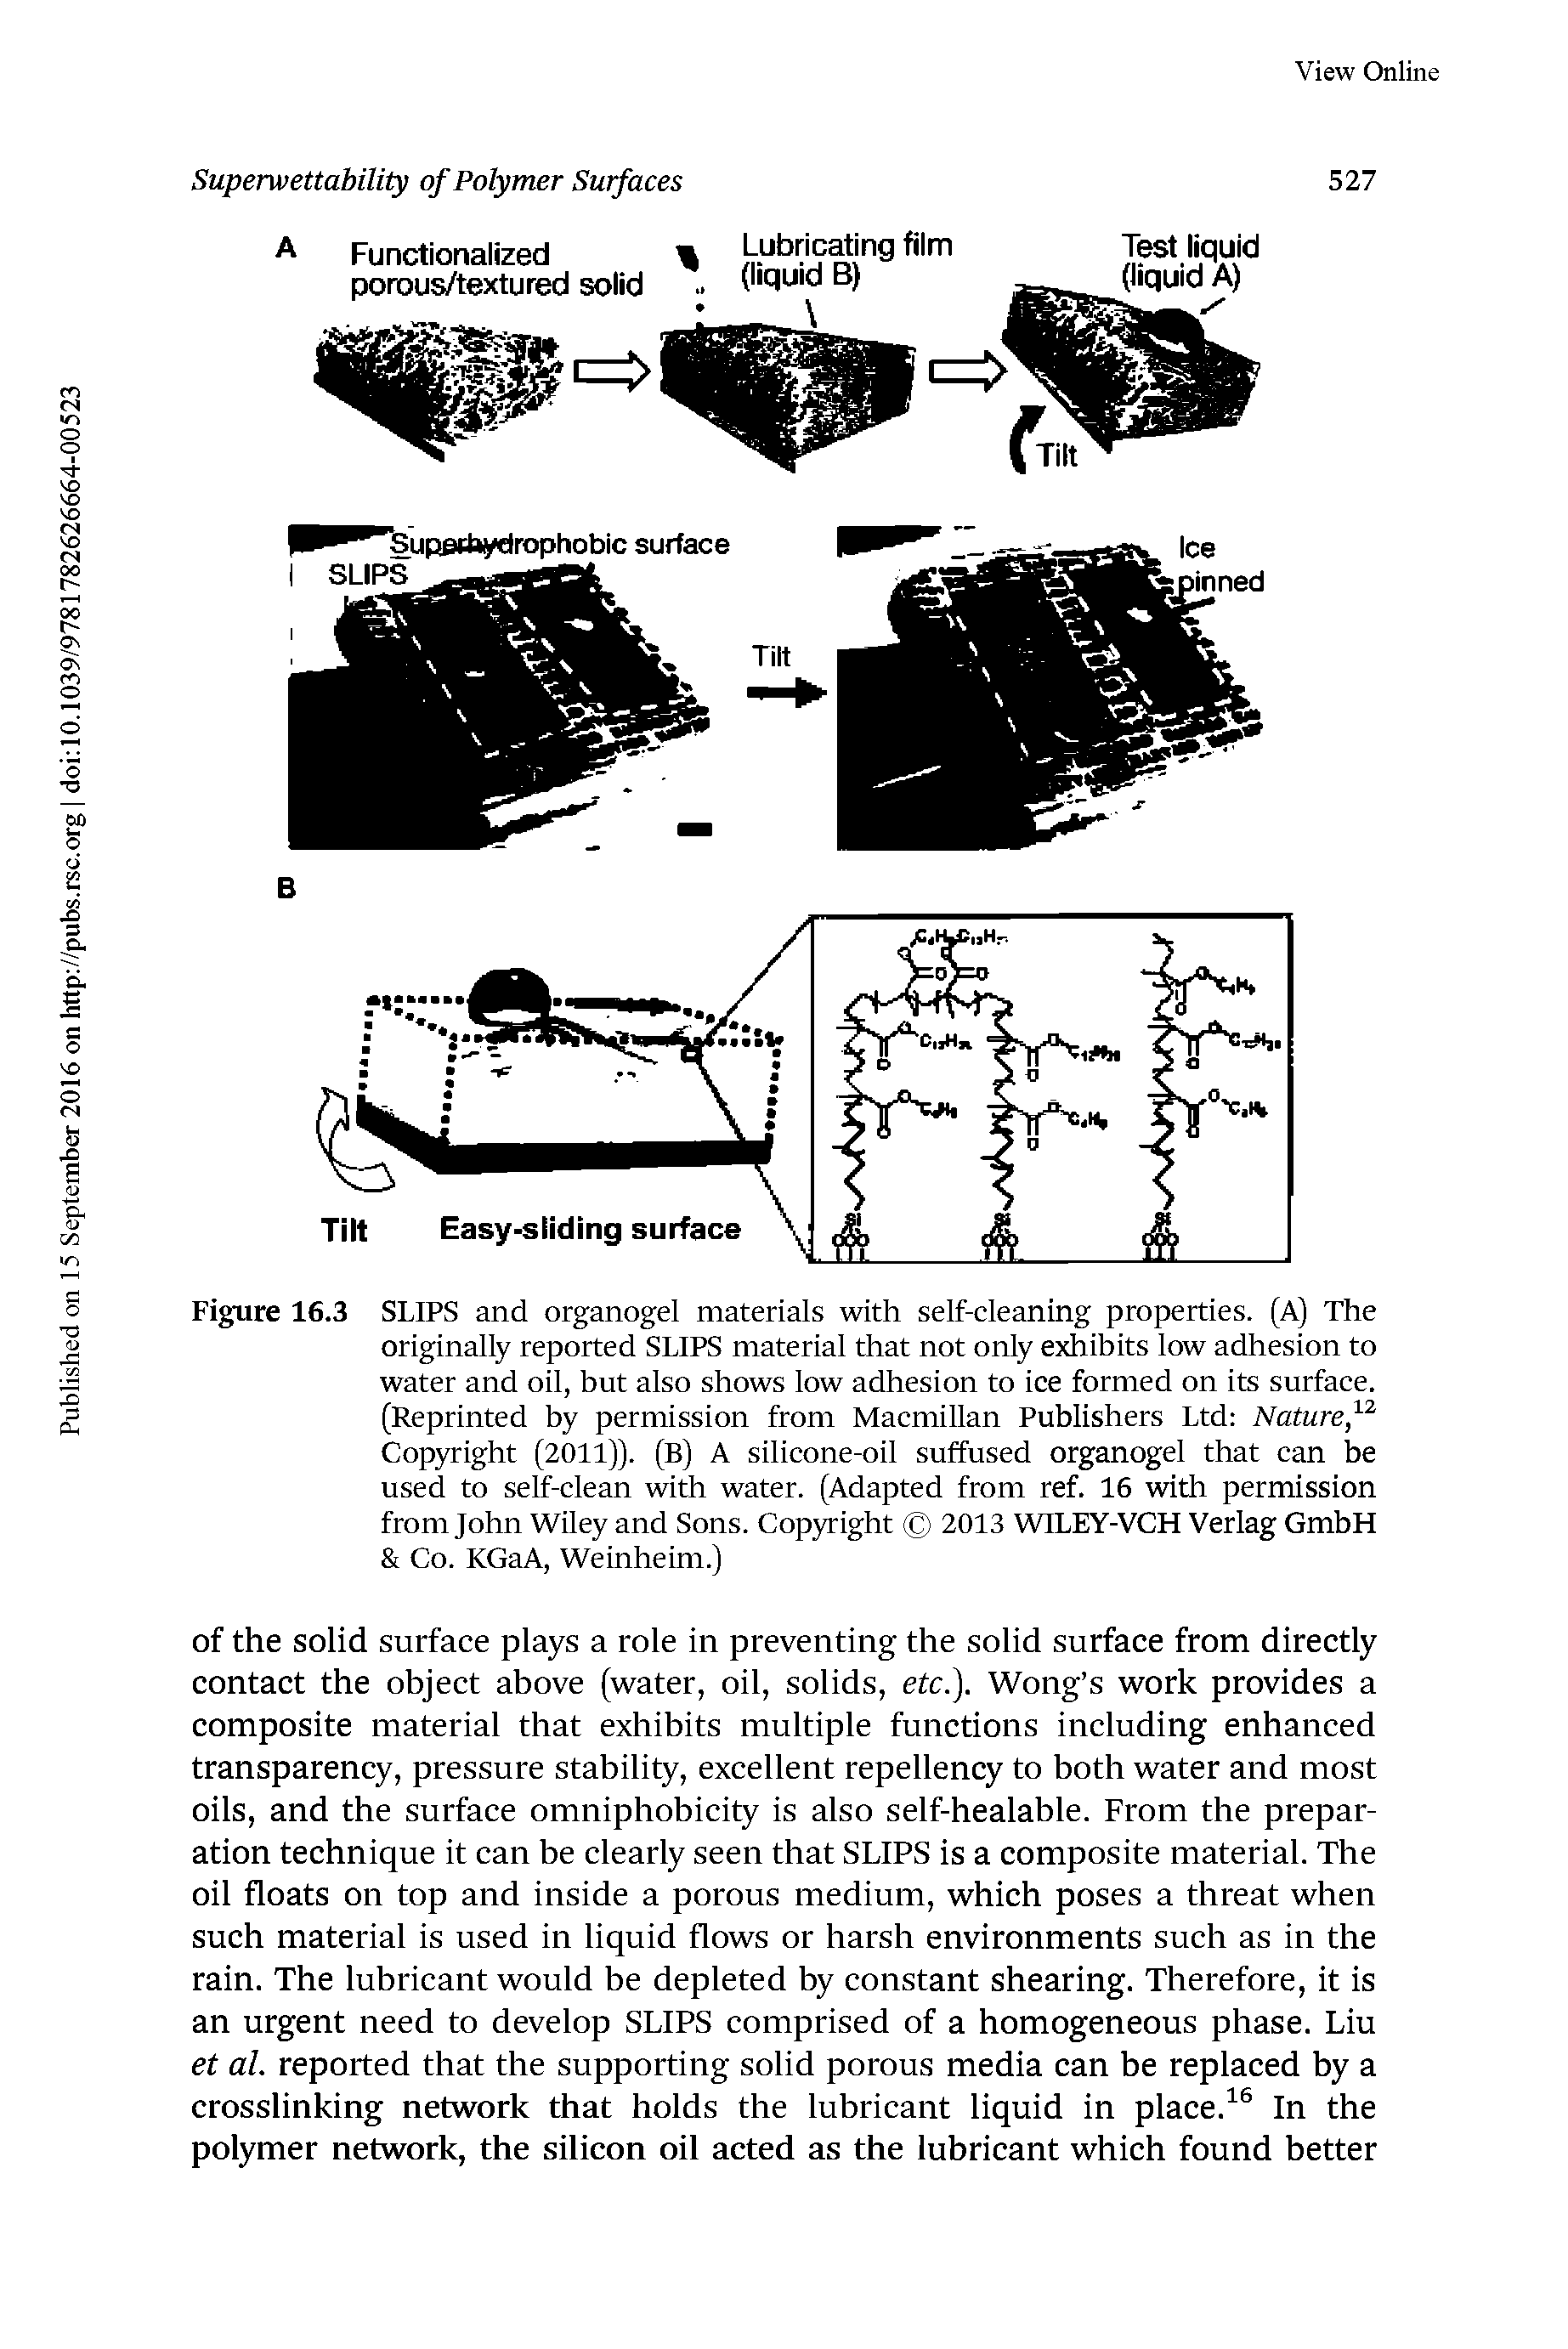 Figure 16.3 SLIPS and organogel materials with self-cleaning properties. (A) The originally reported SLIPS material that not only exhibits low adhesion to water and oil, hut also shows low adhesion to ice formed on its surface. (Reprinted hy permission from Macmillan Publishers Ltd Nature, Cop Tight (2011)). (B) A silicone-oil suffused organogel that can be used to self-clean with water. (Adapted from ref. 16 with permission from John Whey and Sons. Cop right 2013 WILEY-VCH Verlag GmbH Co. KGaA, Weinheim.)...